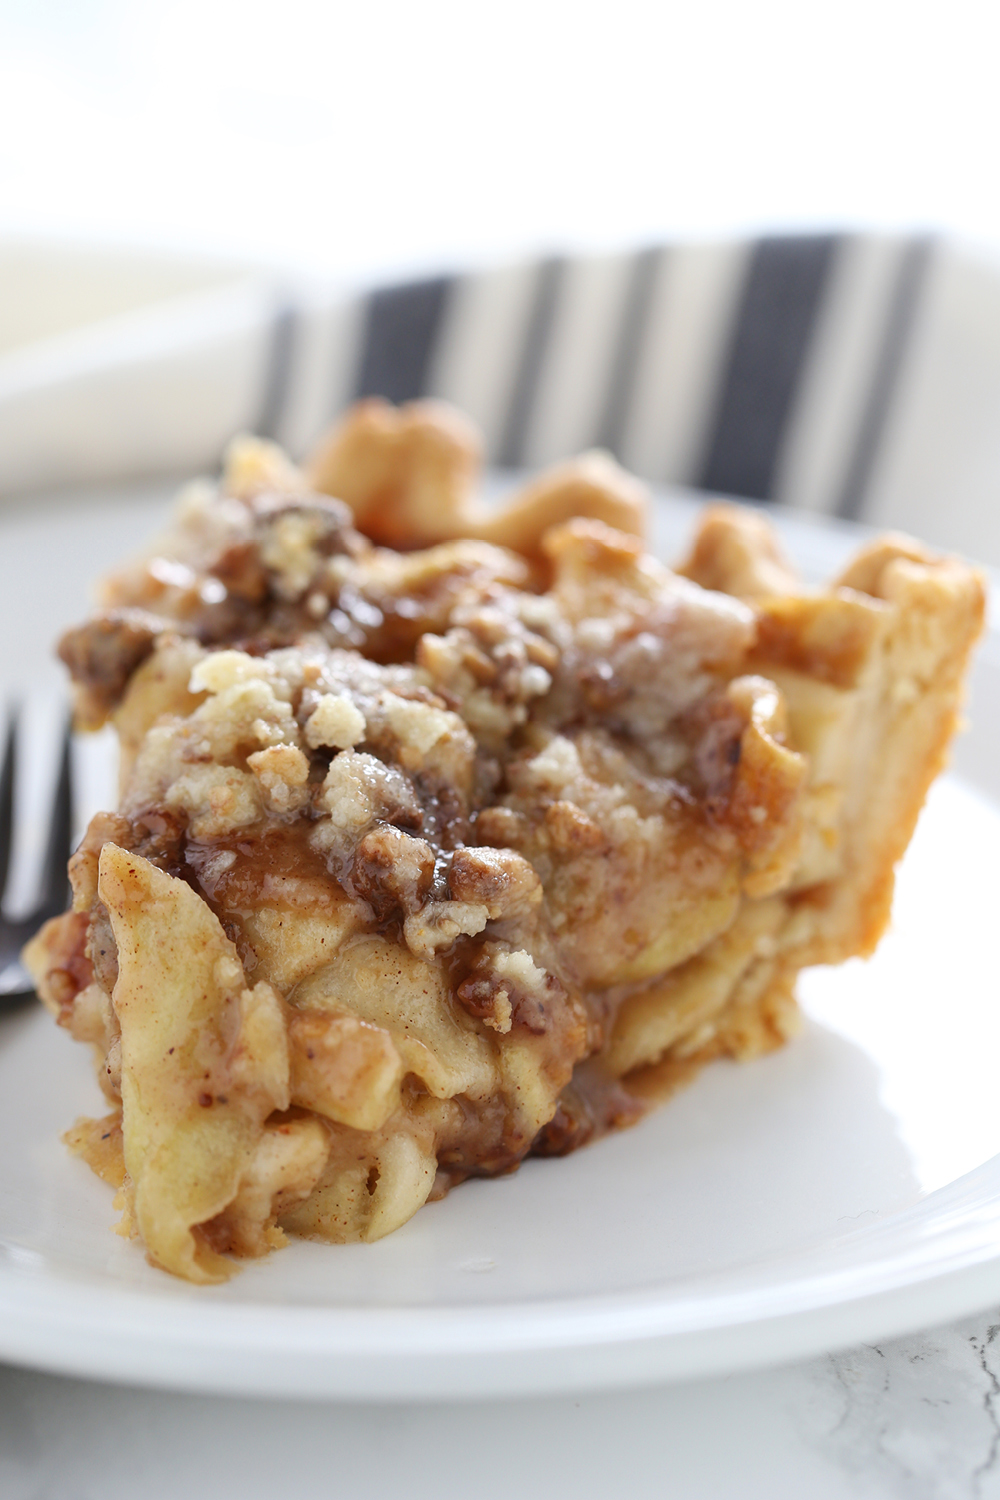 this delicious caramel apple streusel pie is perfect for summer BBQs, Christmas in July, or any get-together!